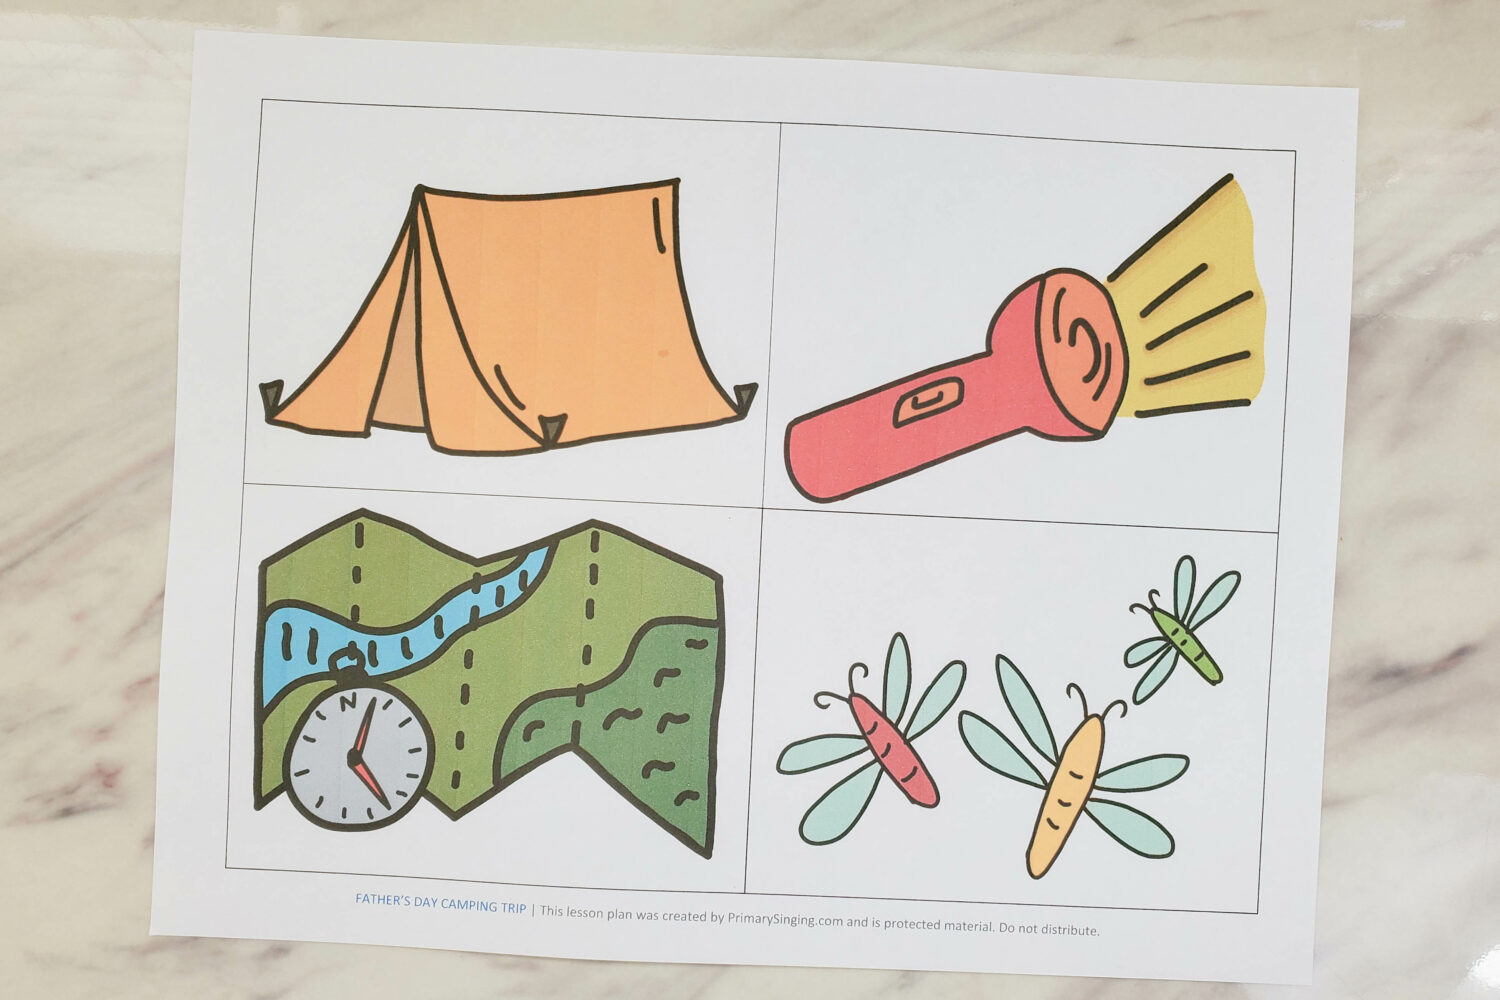 Camping Trip Singing Time Game - A fun lesson plan with printable song helps perfect for teaching your Father's Day Primary songs or as a great summer themed review activity! Fill up the campground with these fun illustrations and ways to sing. LDS Primary Music Leaders and home Come Follow Me ideas.